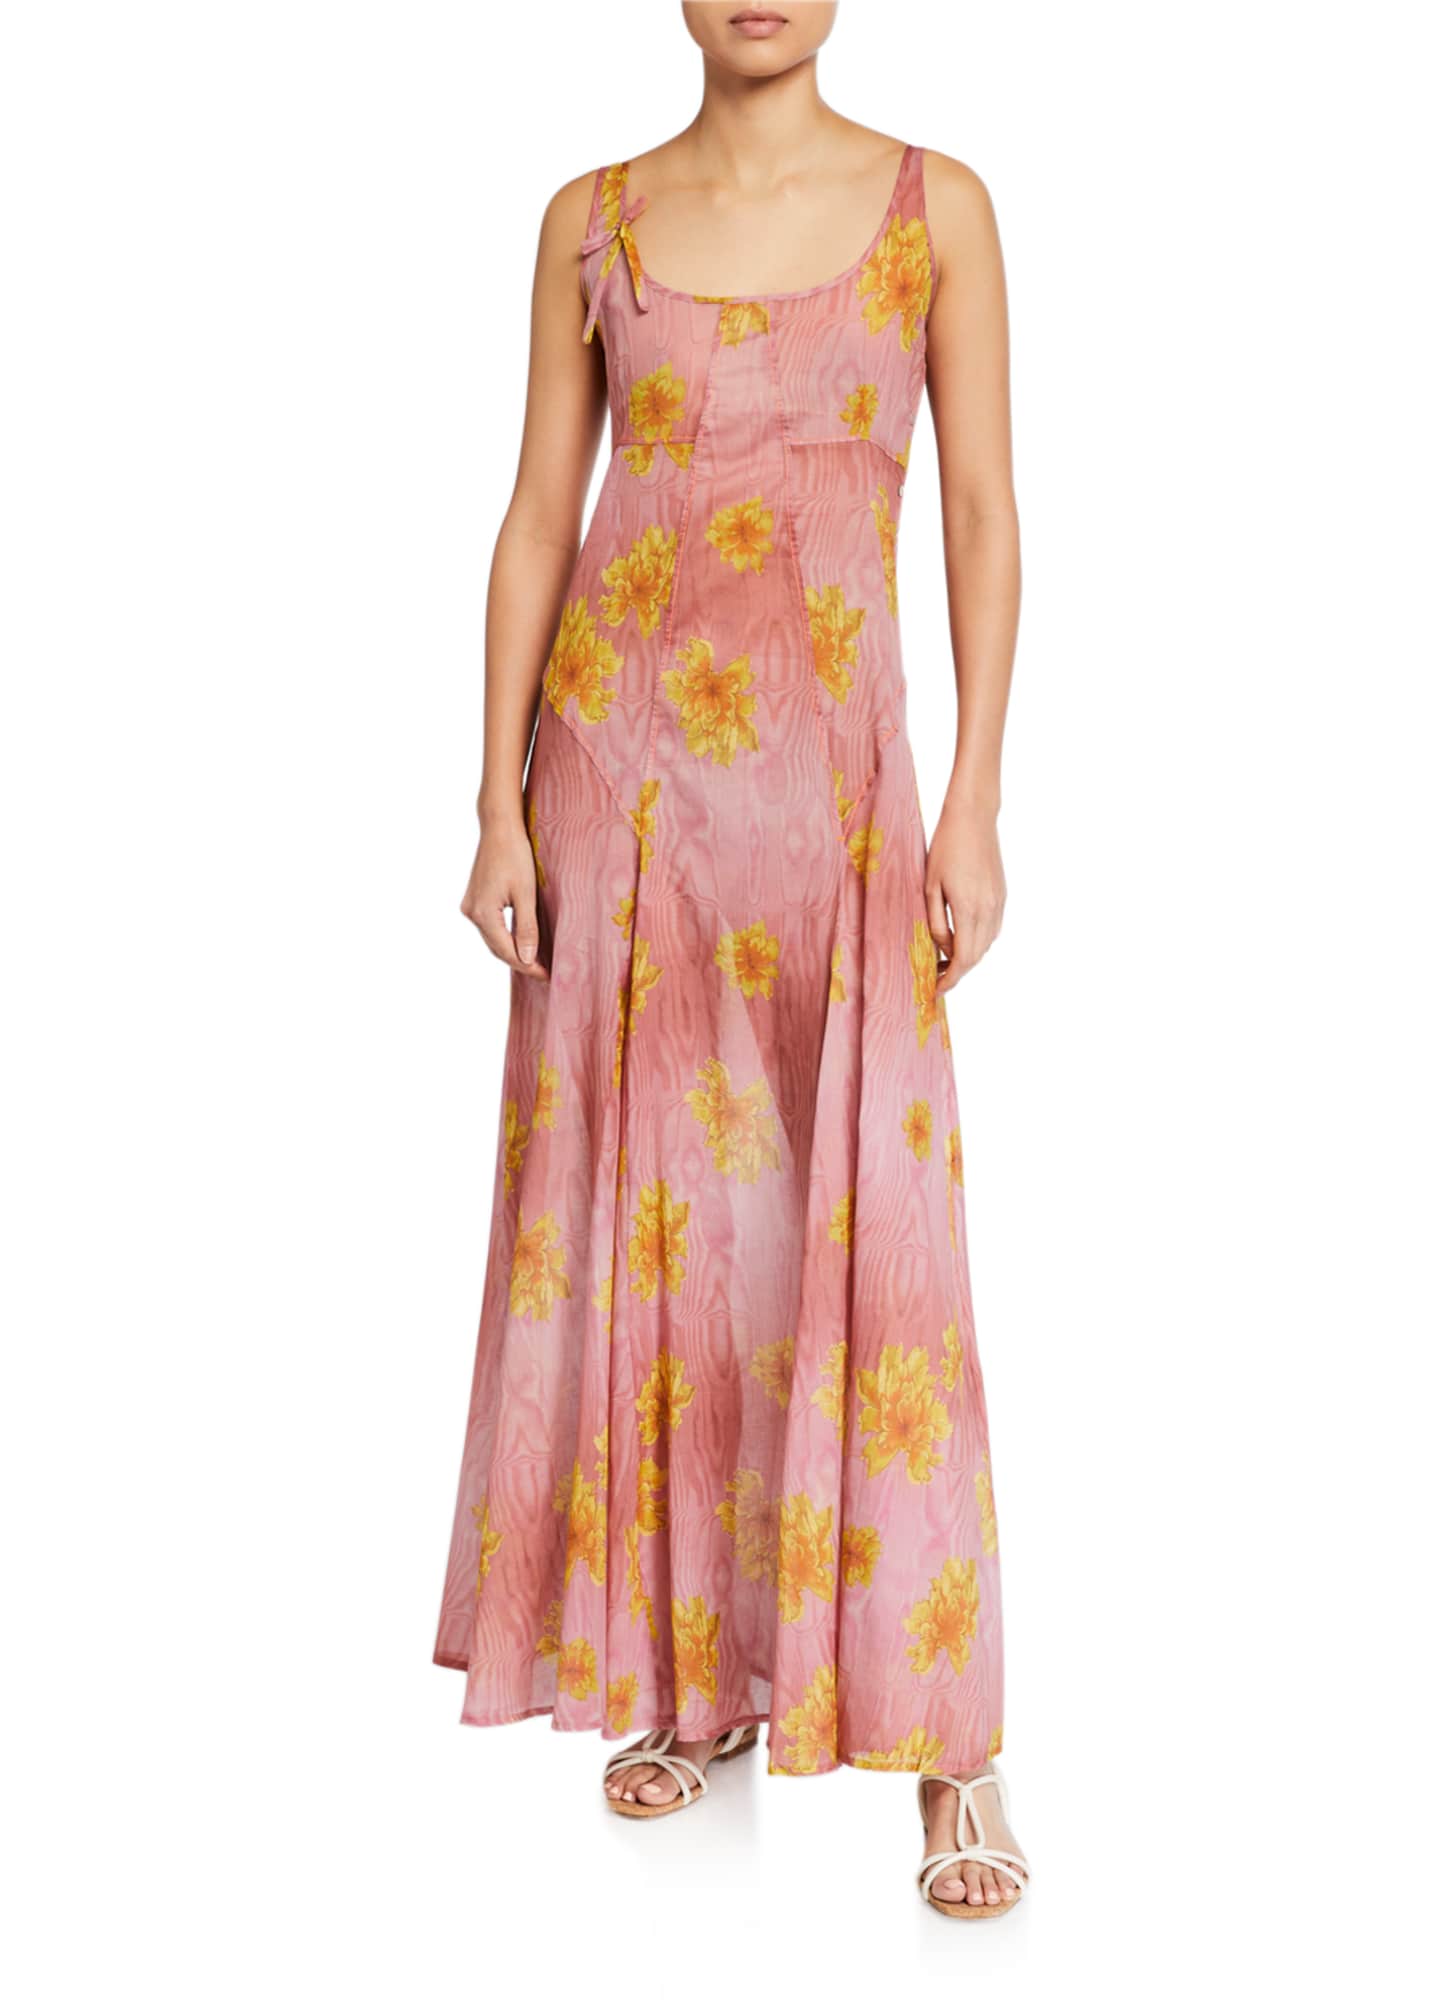 Hanro Camille Floral-Print Tank Nightgown